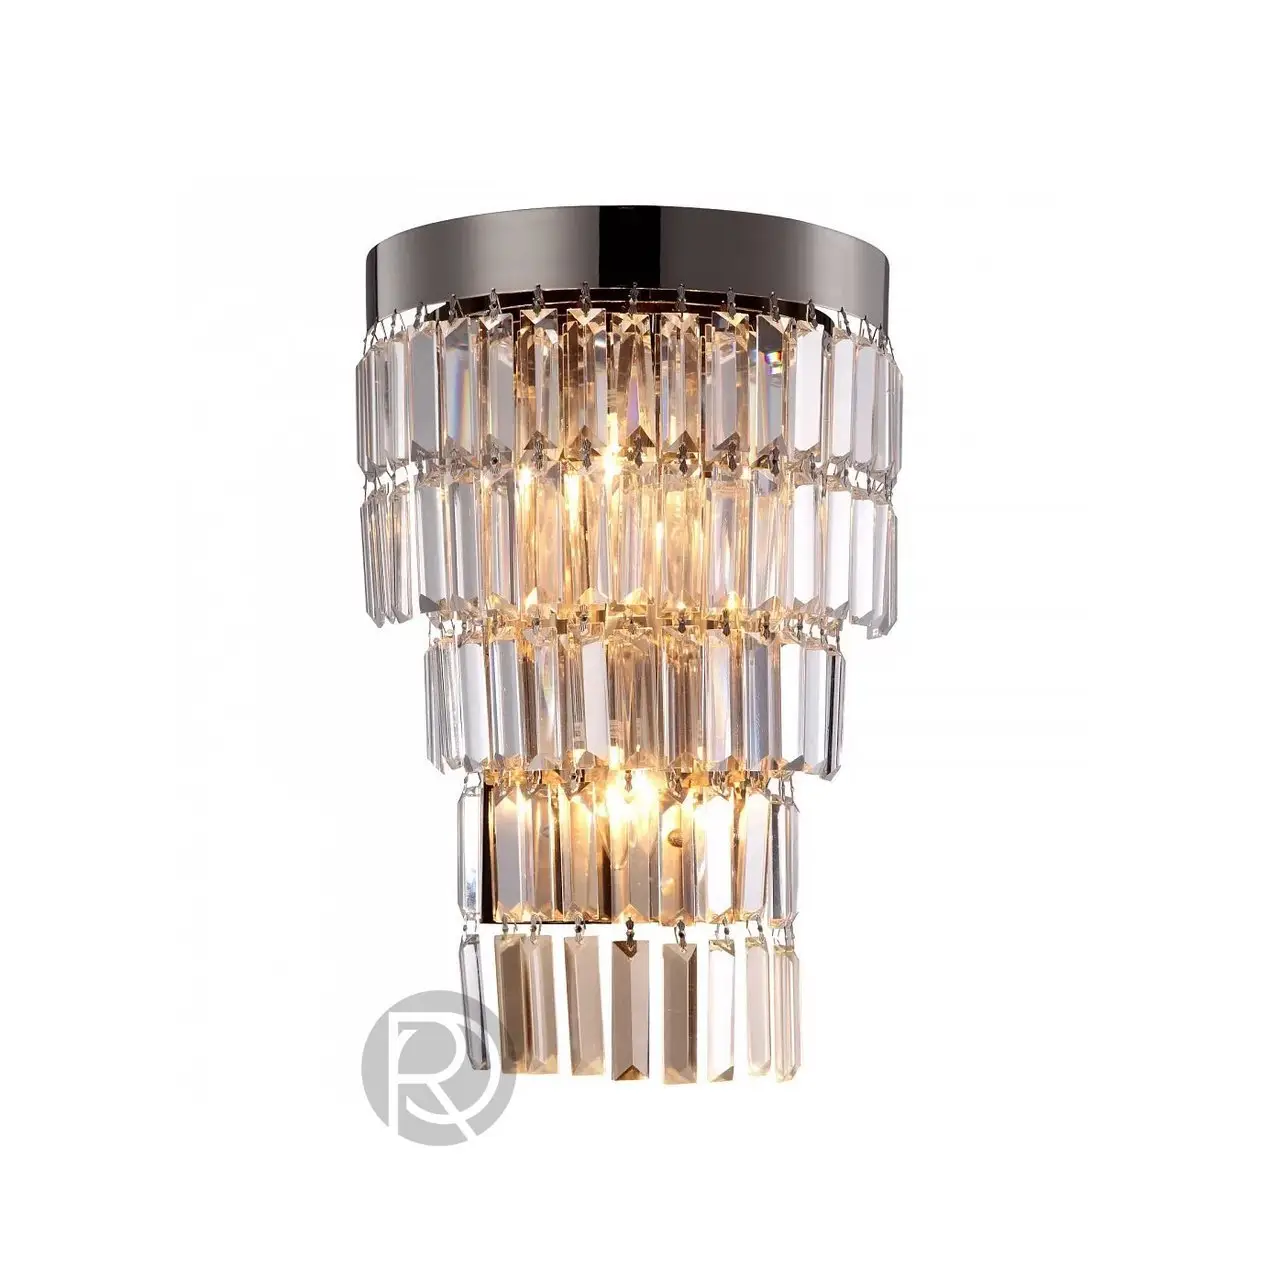 Wall lamp (Sconce) GALLA by RV Astley